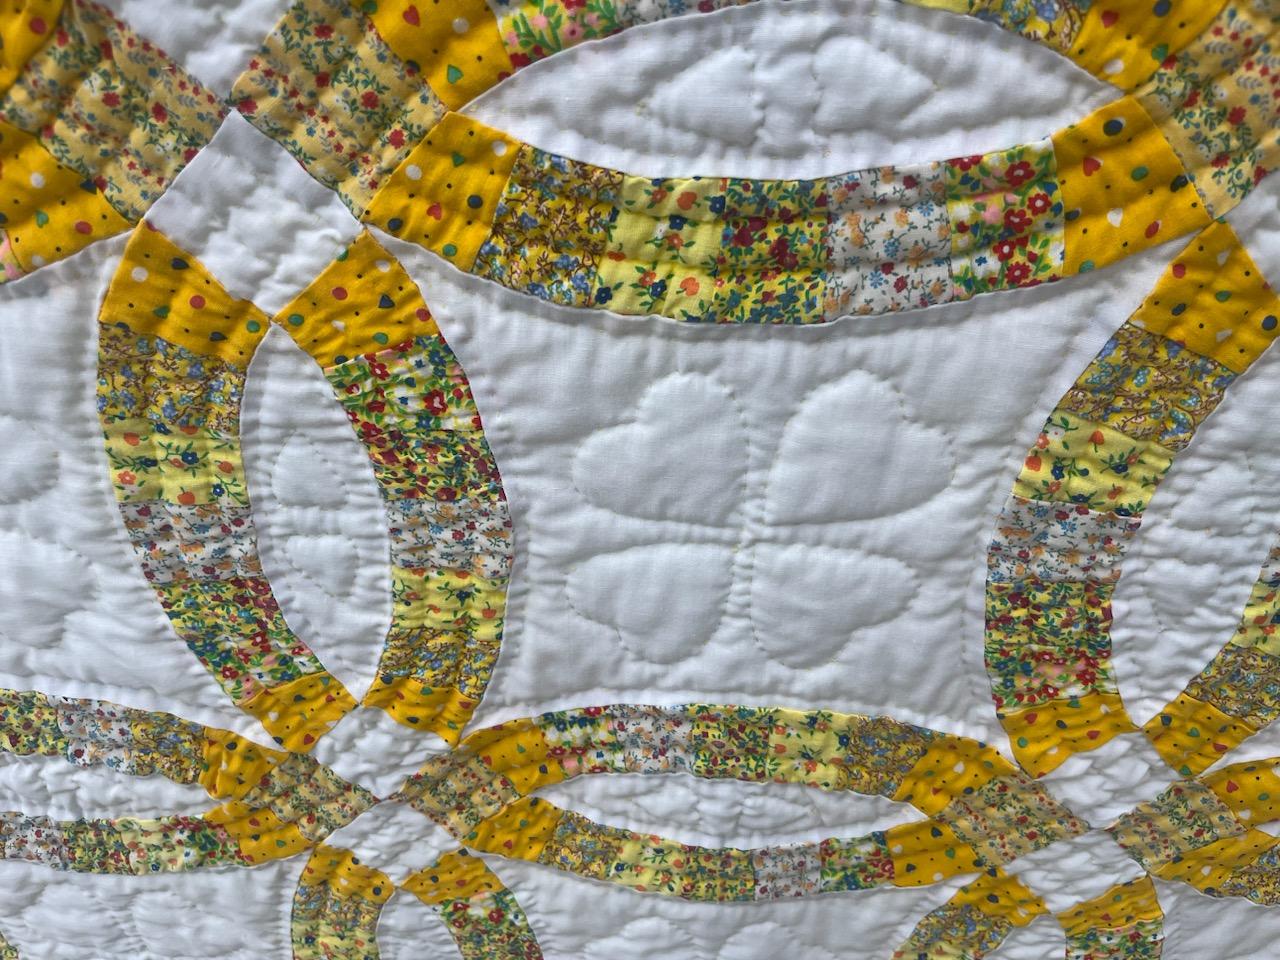 Double Wedding Ring Quilt For Sale 2